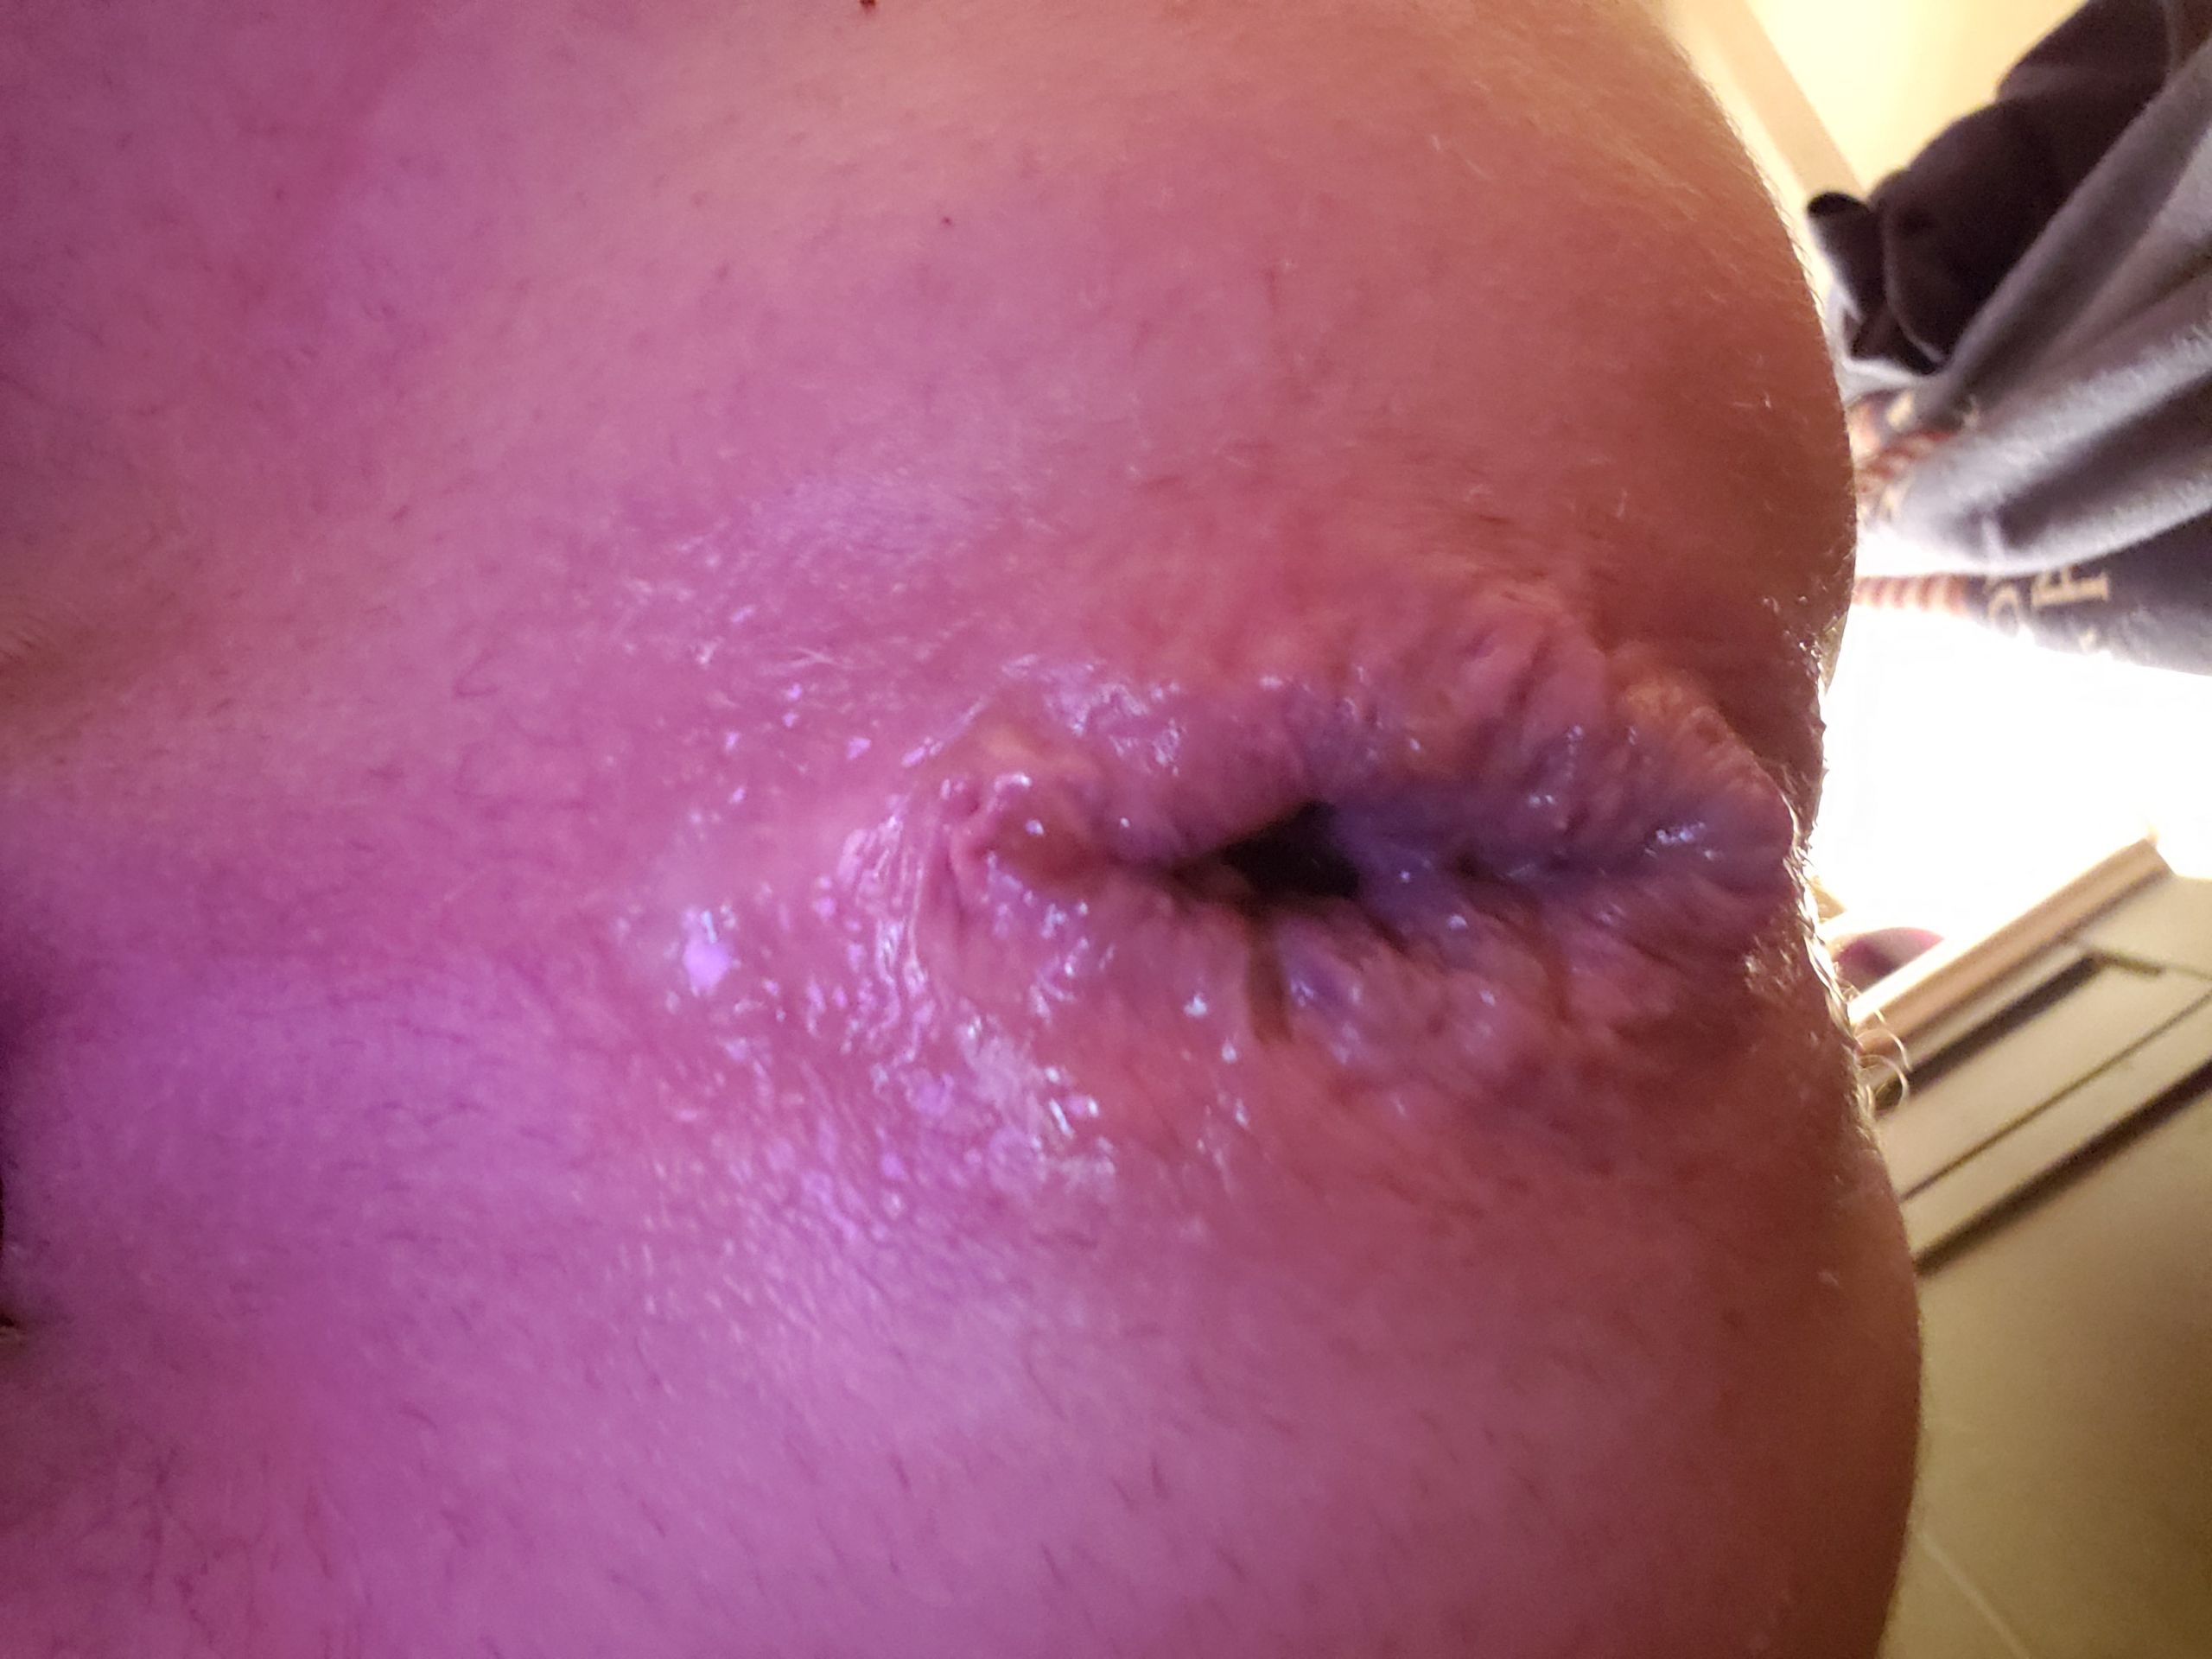 My stretched hole